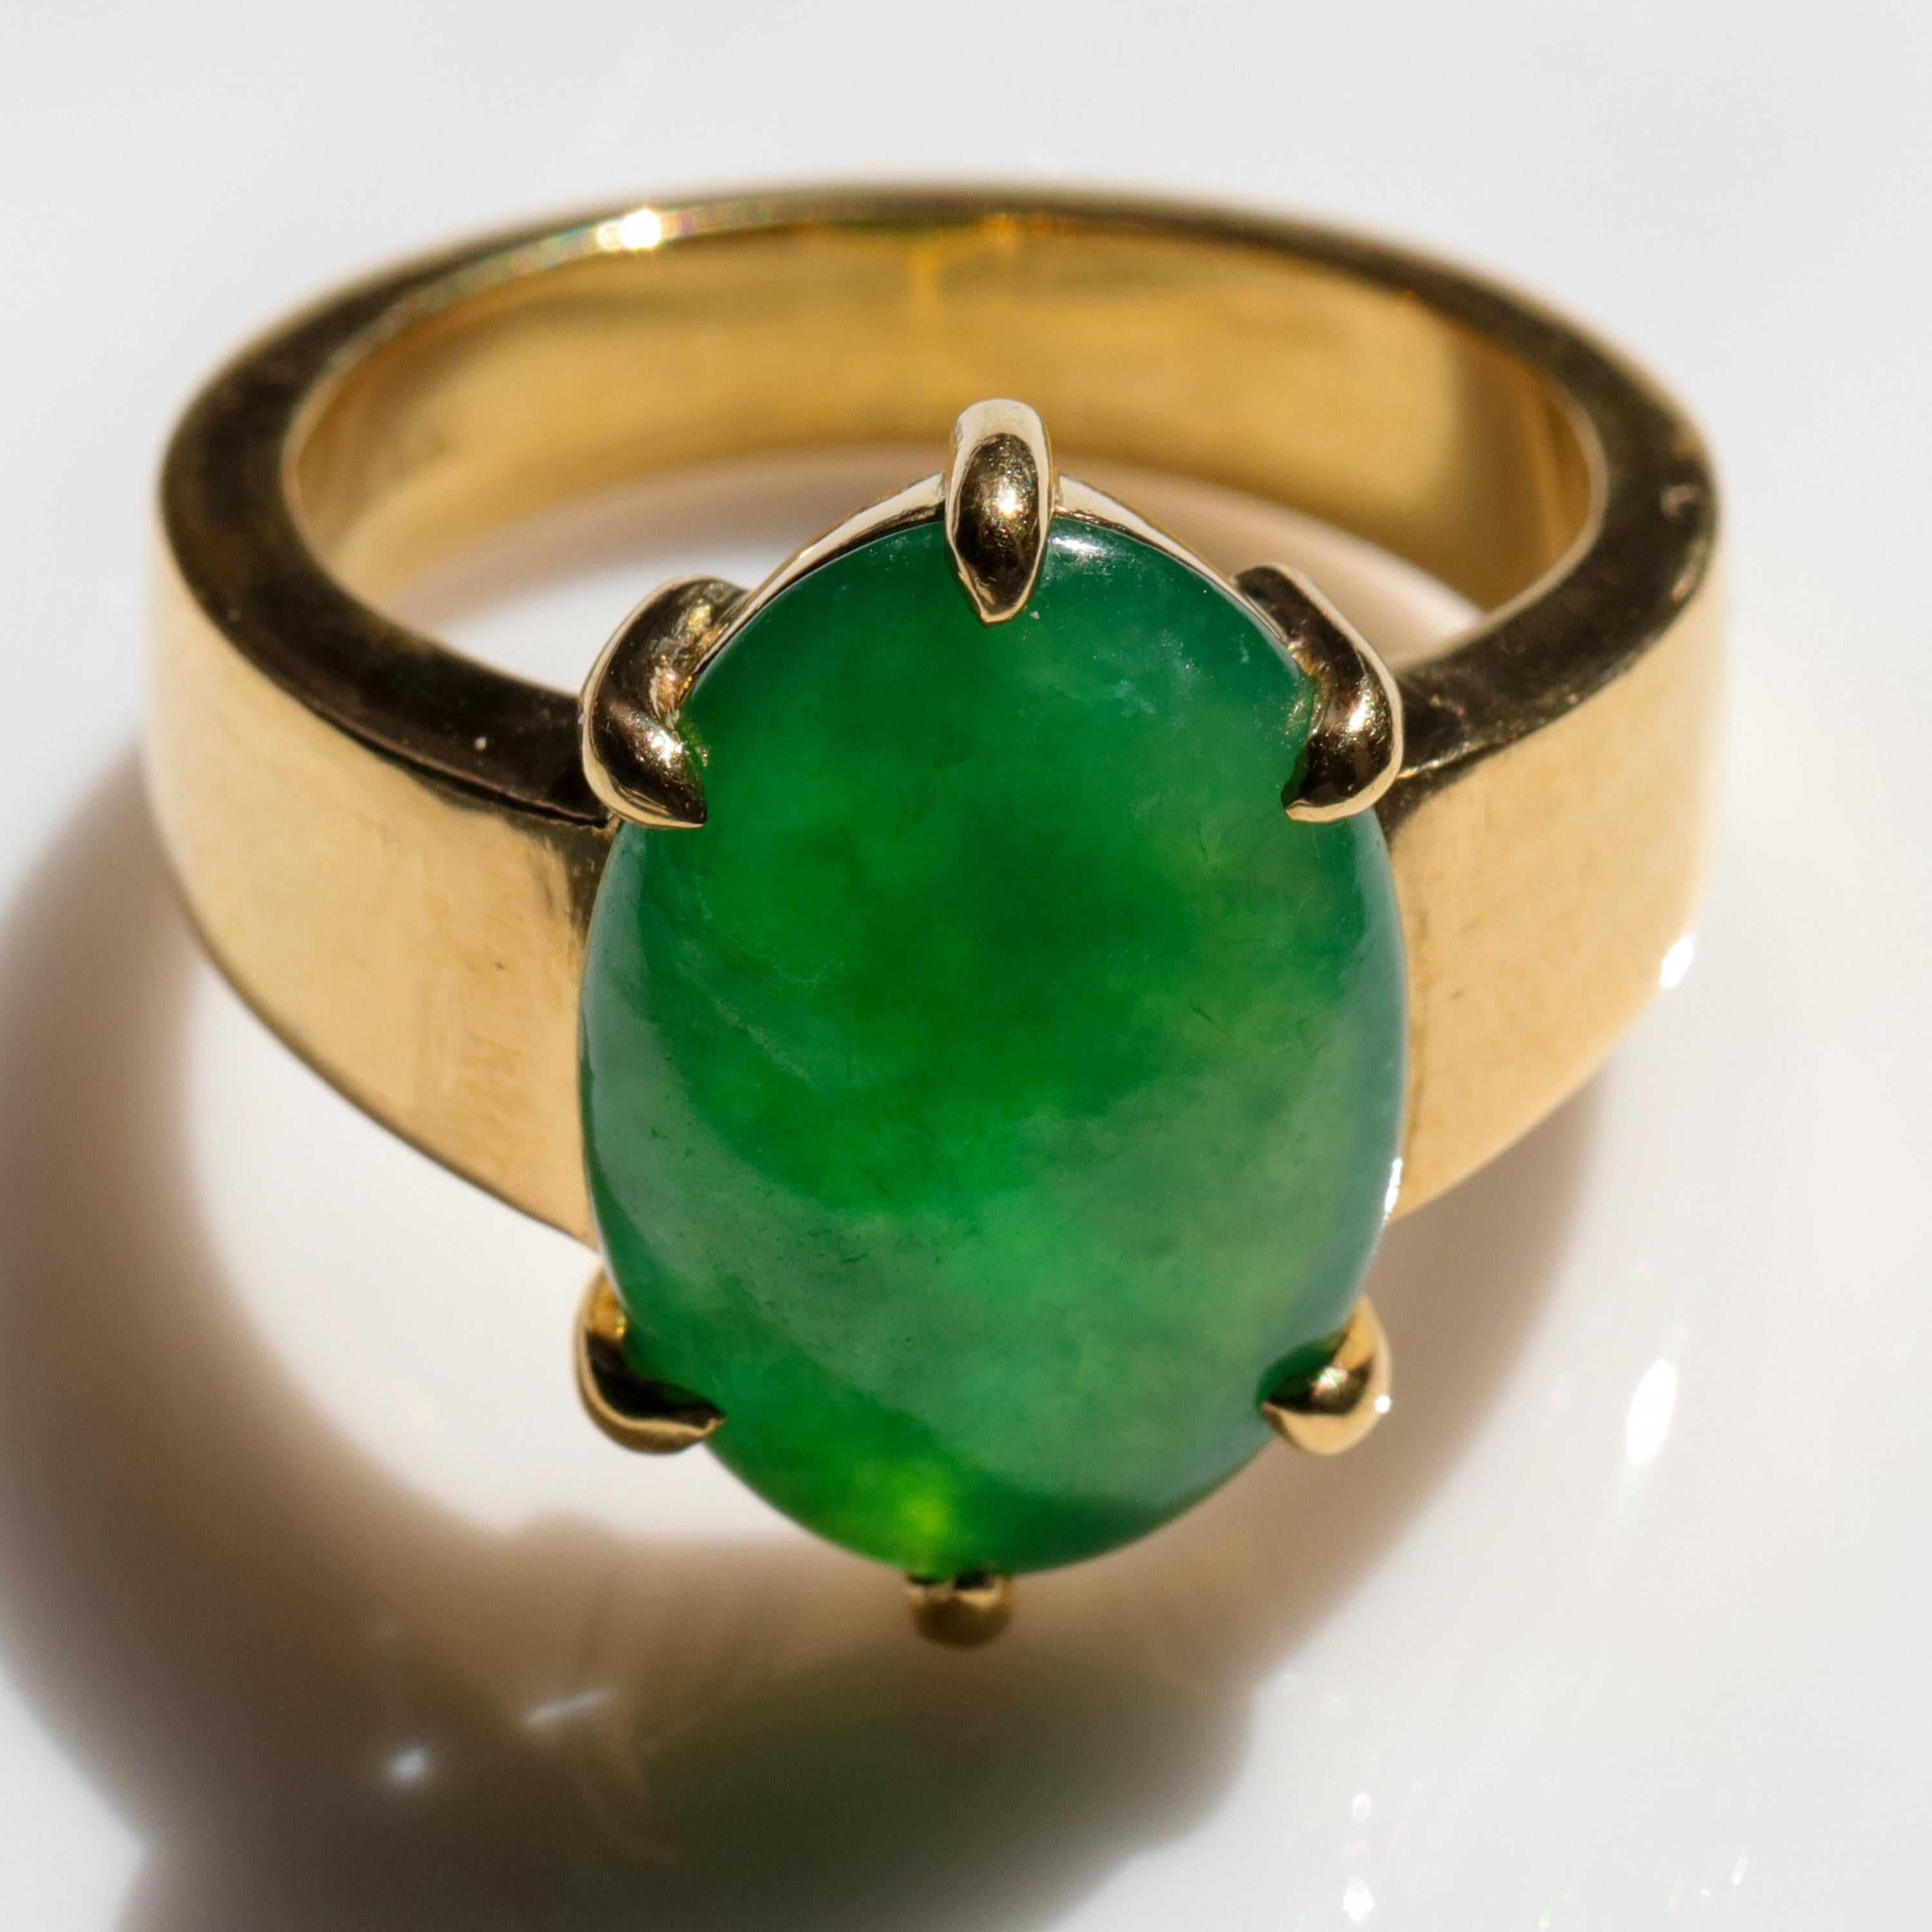 Contemporary Jade Ring as Featured in the New York Times and Town & Country Magazine